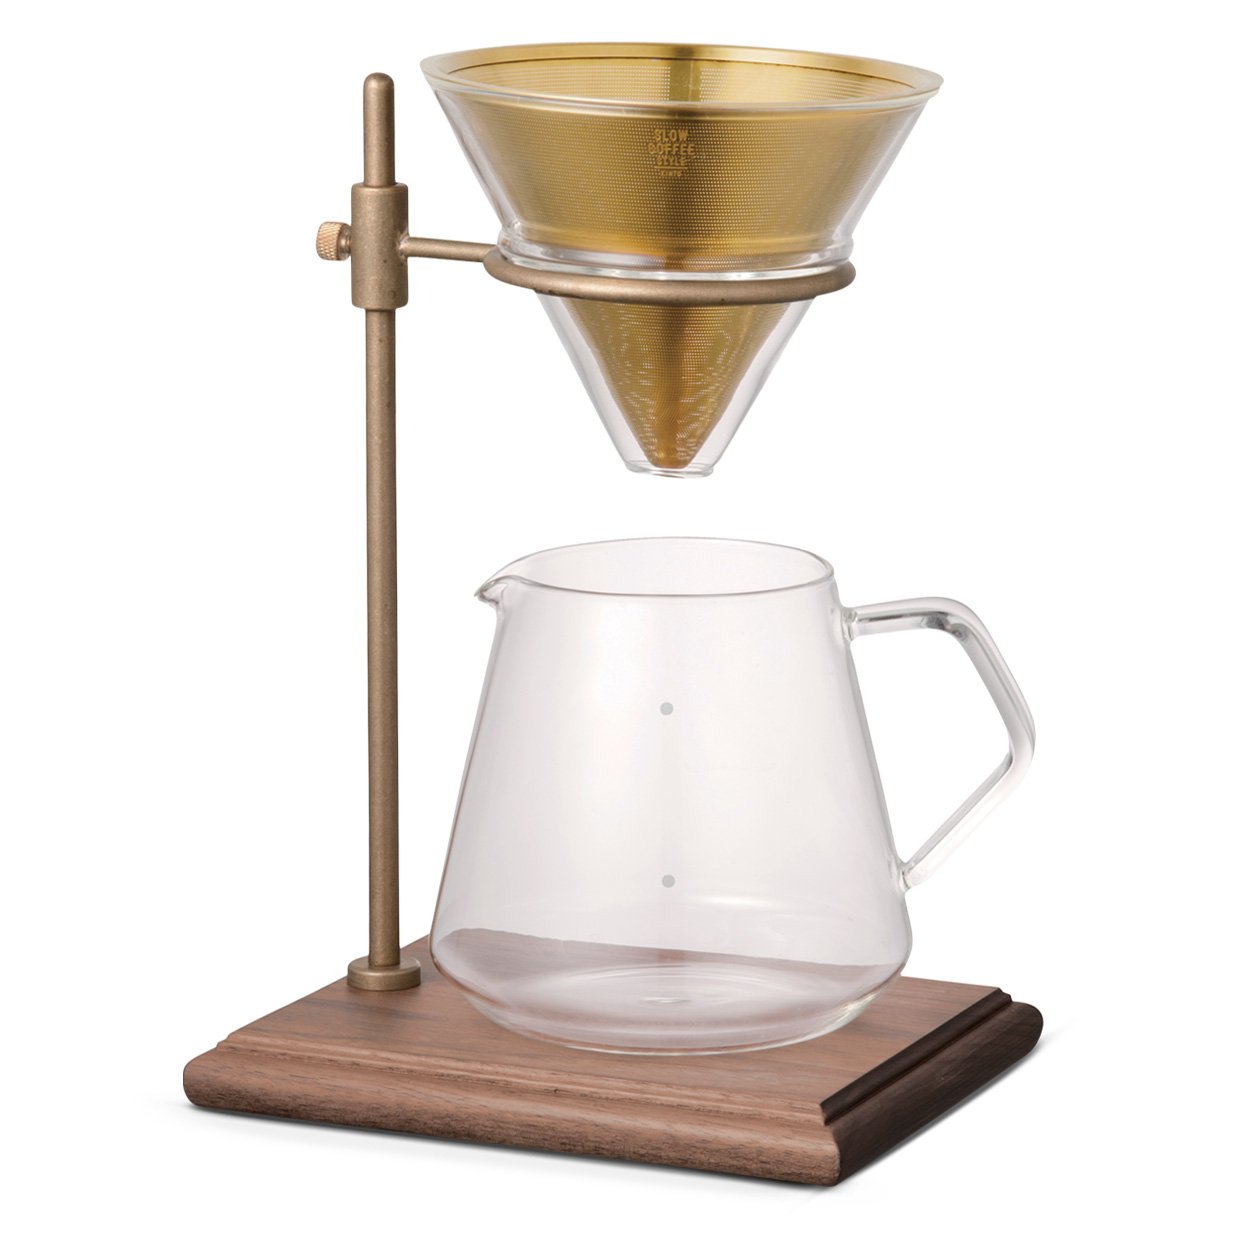 kinto-products-slow-coffee-style-specialty-brewerstand_1260x.jpg